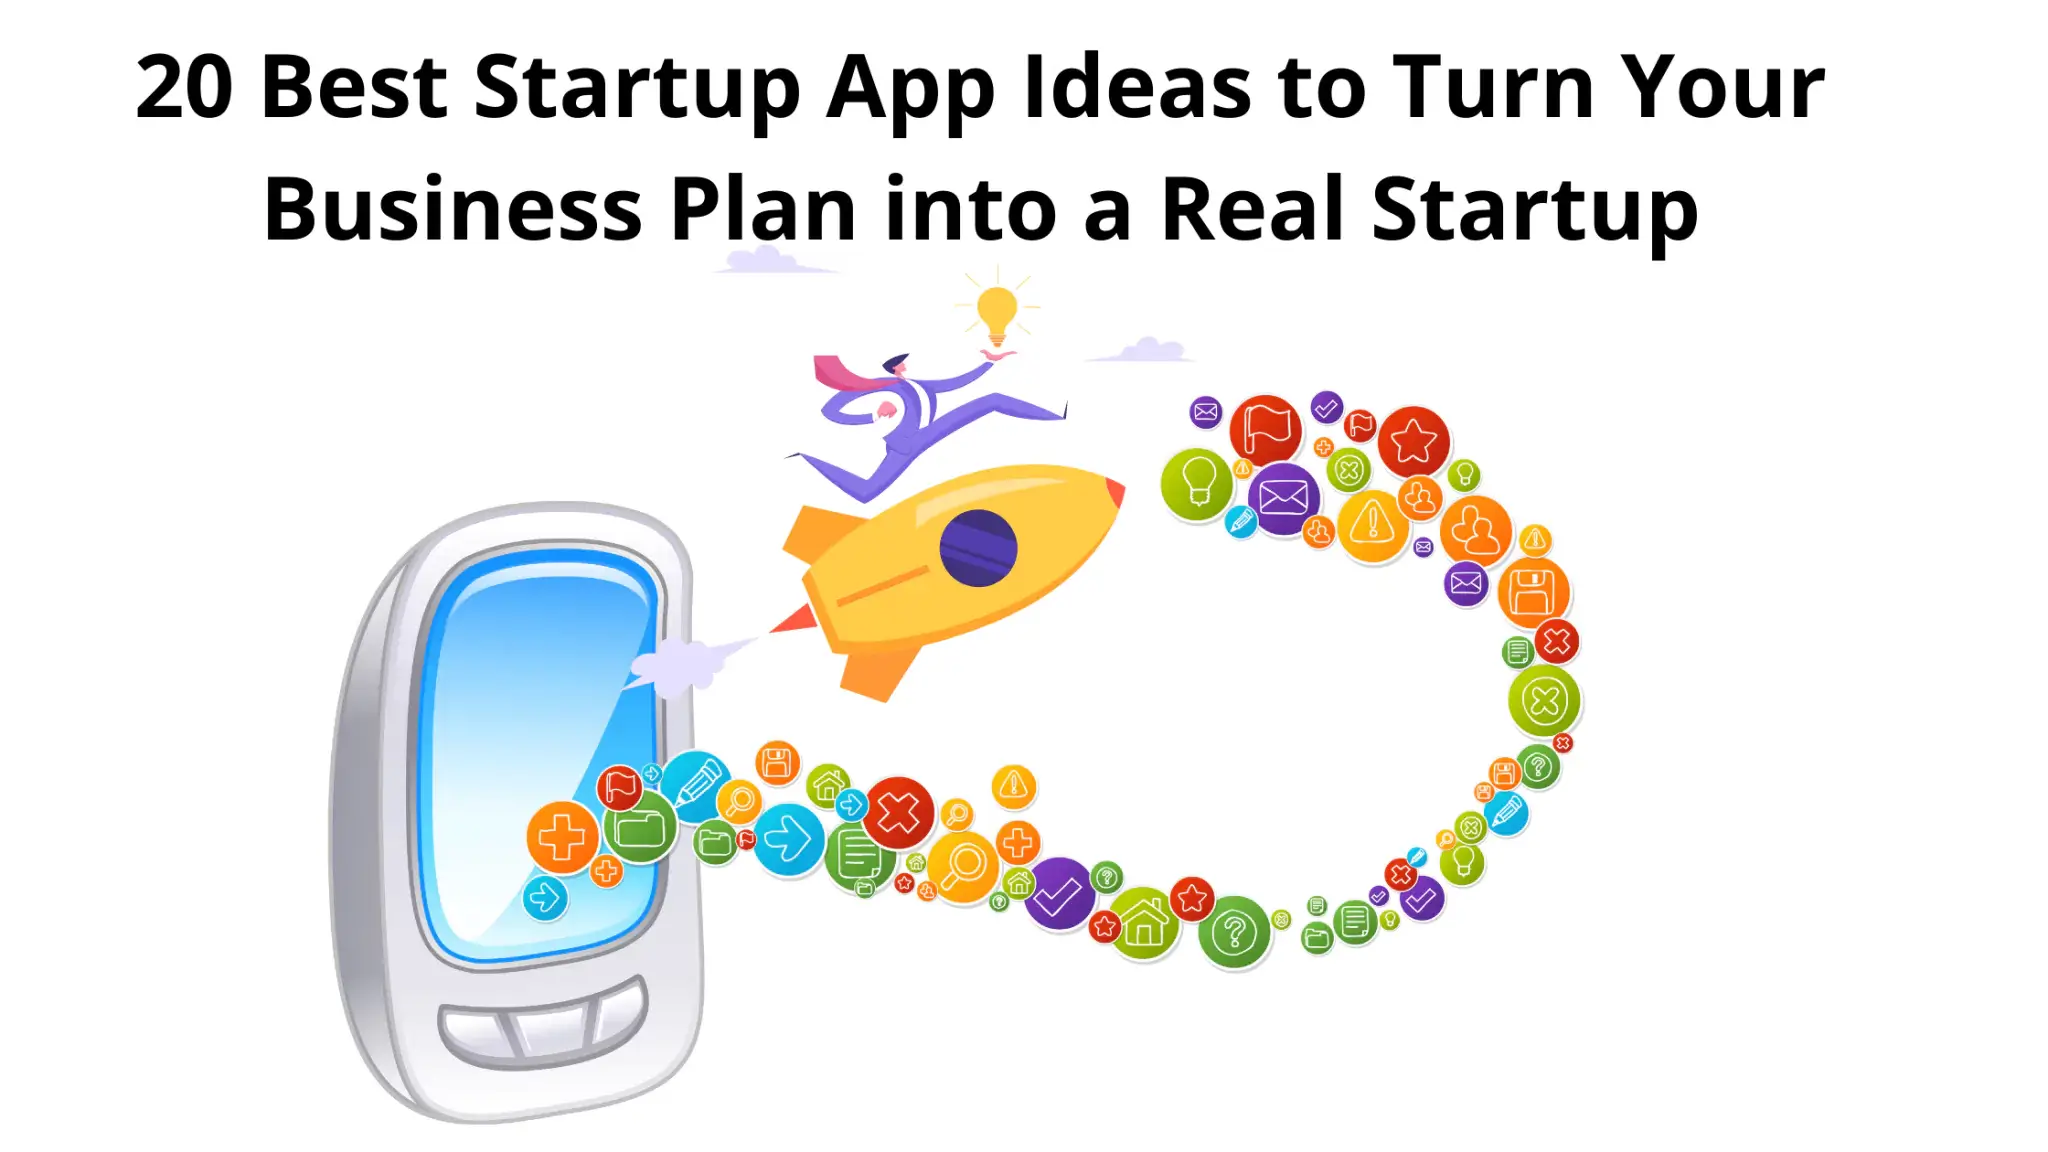 20-best-startup-app-ideas-to-turn-your-business-plan-into-a-real-startup-2048x1152-1